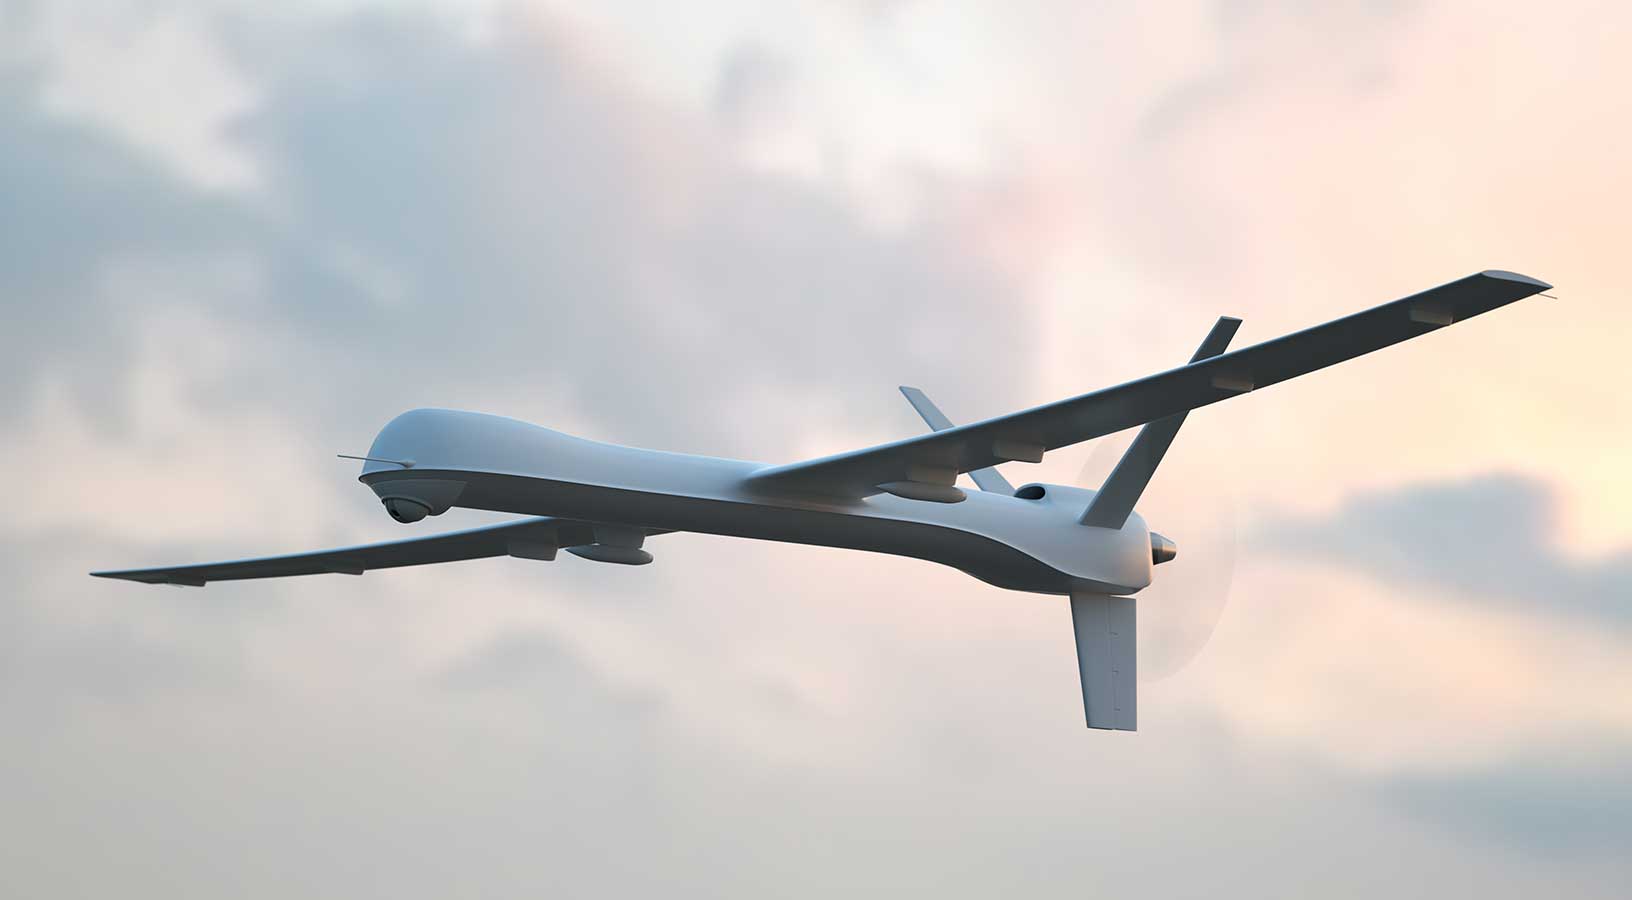 Unmanned aerial vehicle in the sky